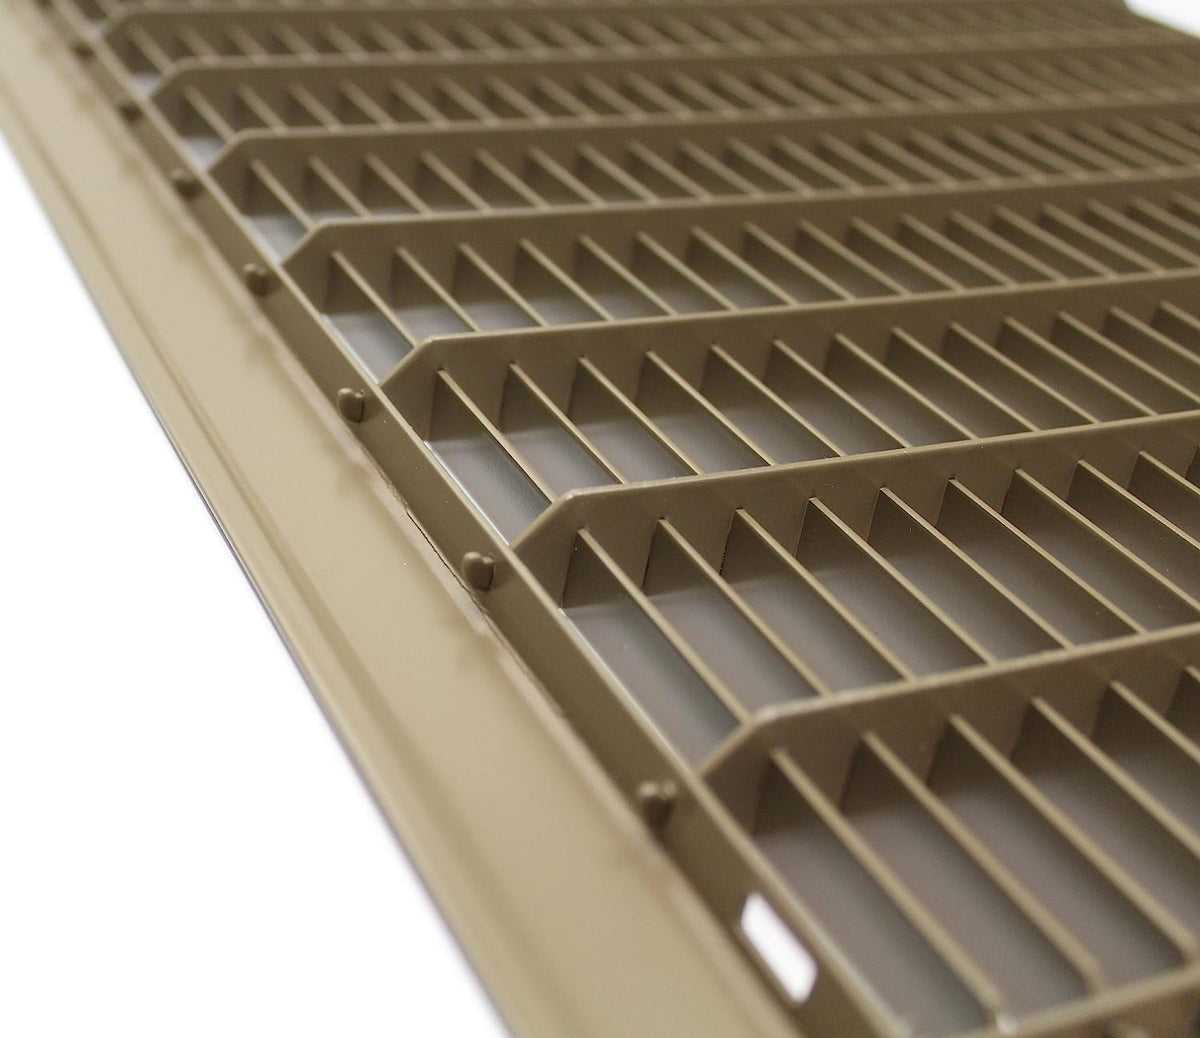 24&quot; X 24&quot; Heavy Duty Floor Grille - Fixed Blades Air Grille - Brown [Outer Dimensions: 25.75 X 25.75]